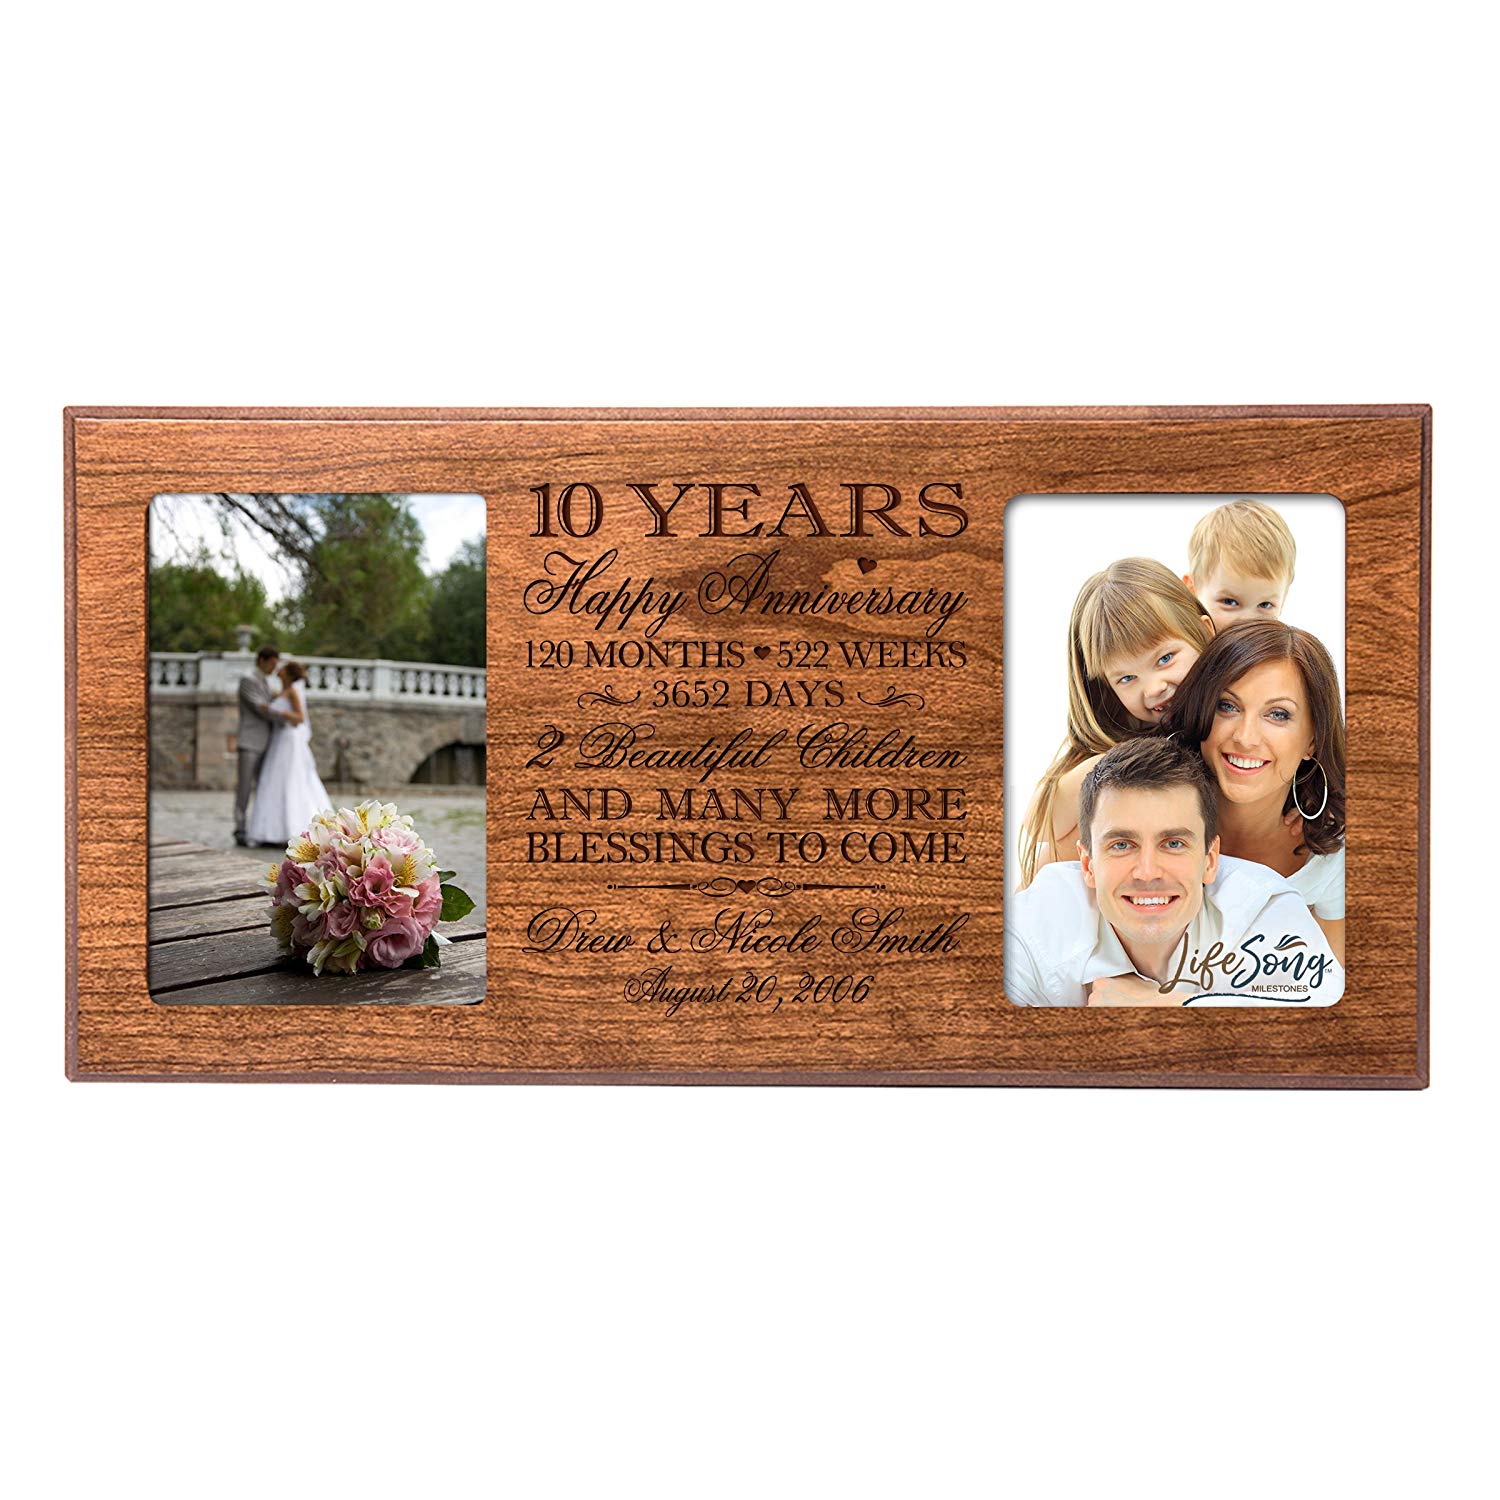 Lifesong Milestones Personalized 10th Wedding Anniversary Double Photo Frame Gift Ideas for Couples